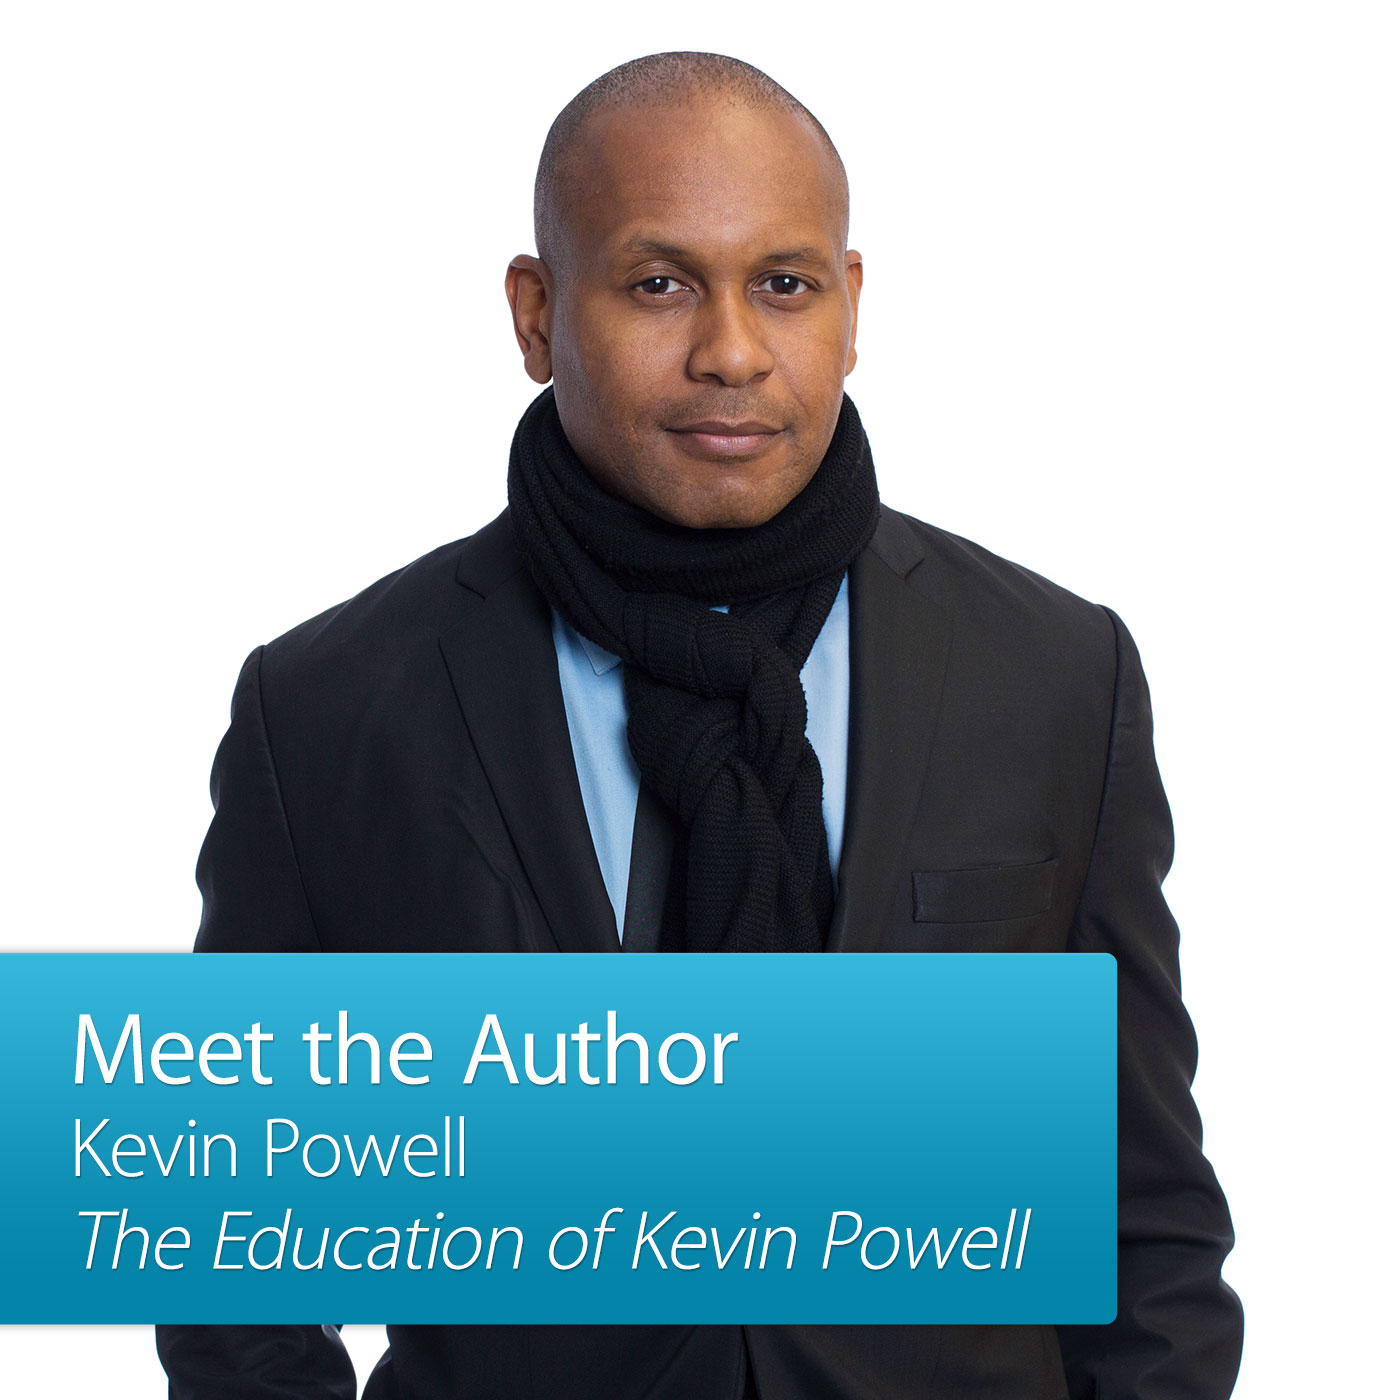 The Education of Kevin Powell: Meet the Author